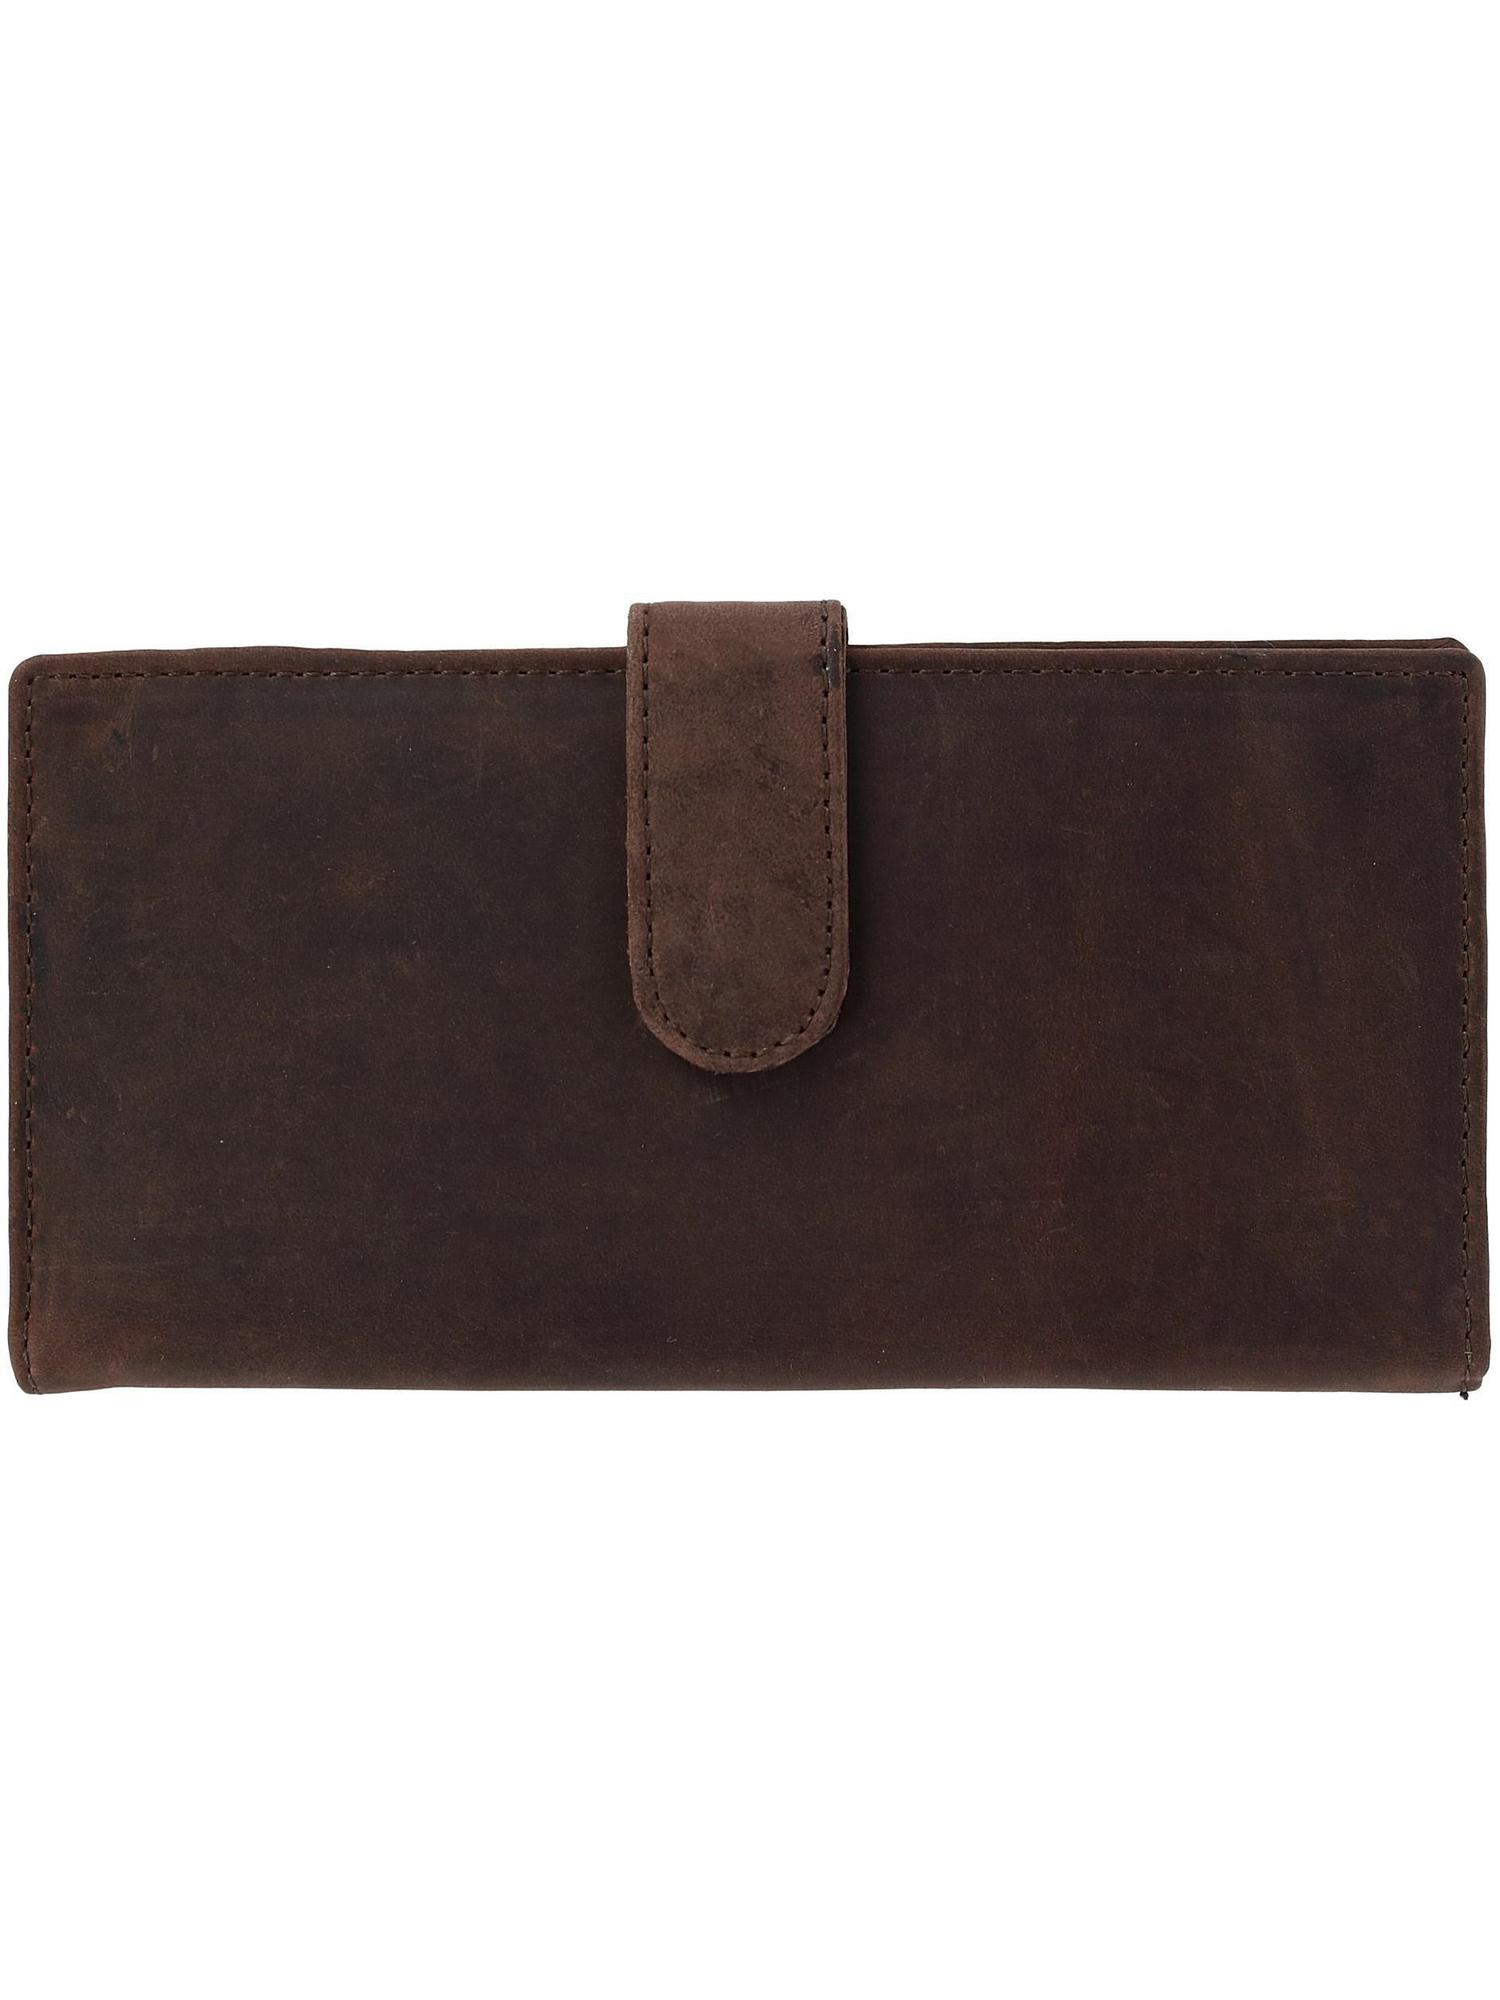 CTM Leather RFID Checkbook Cover with Card Slots and ID